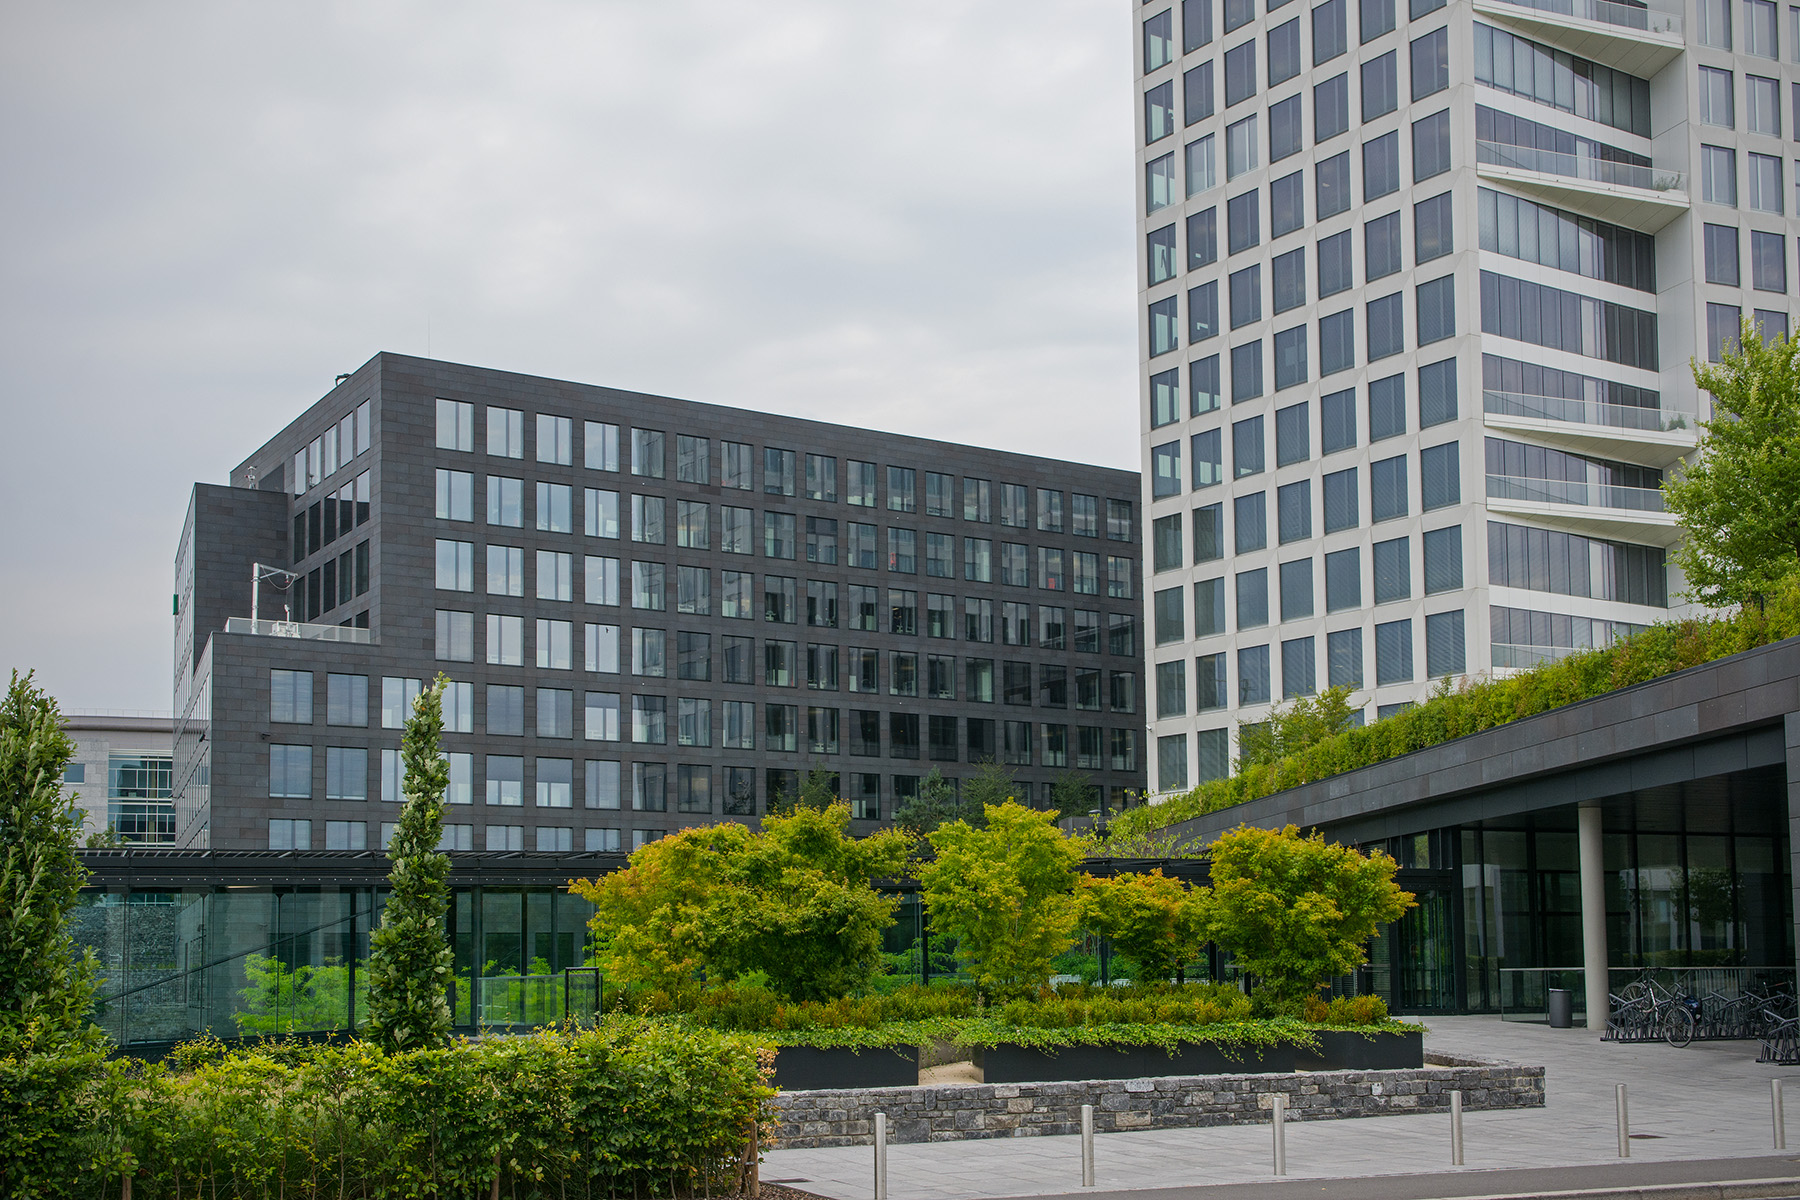 Kirchberg business district in Luxembourg